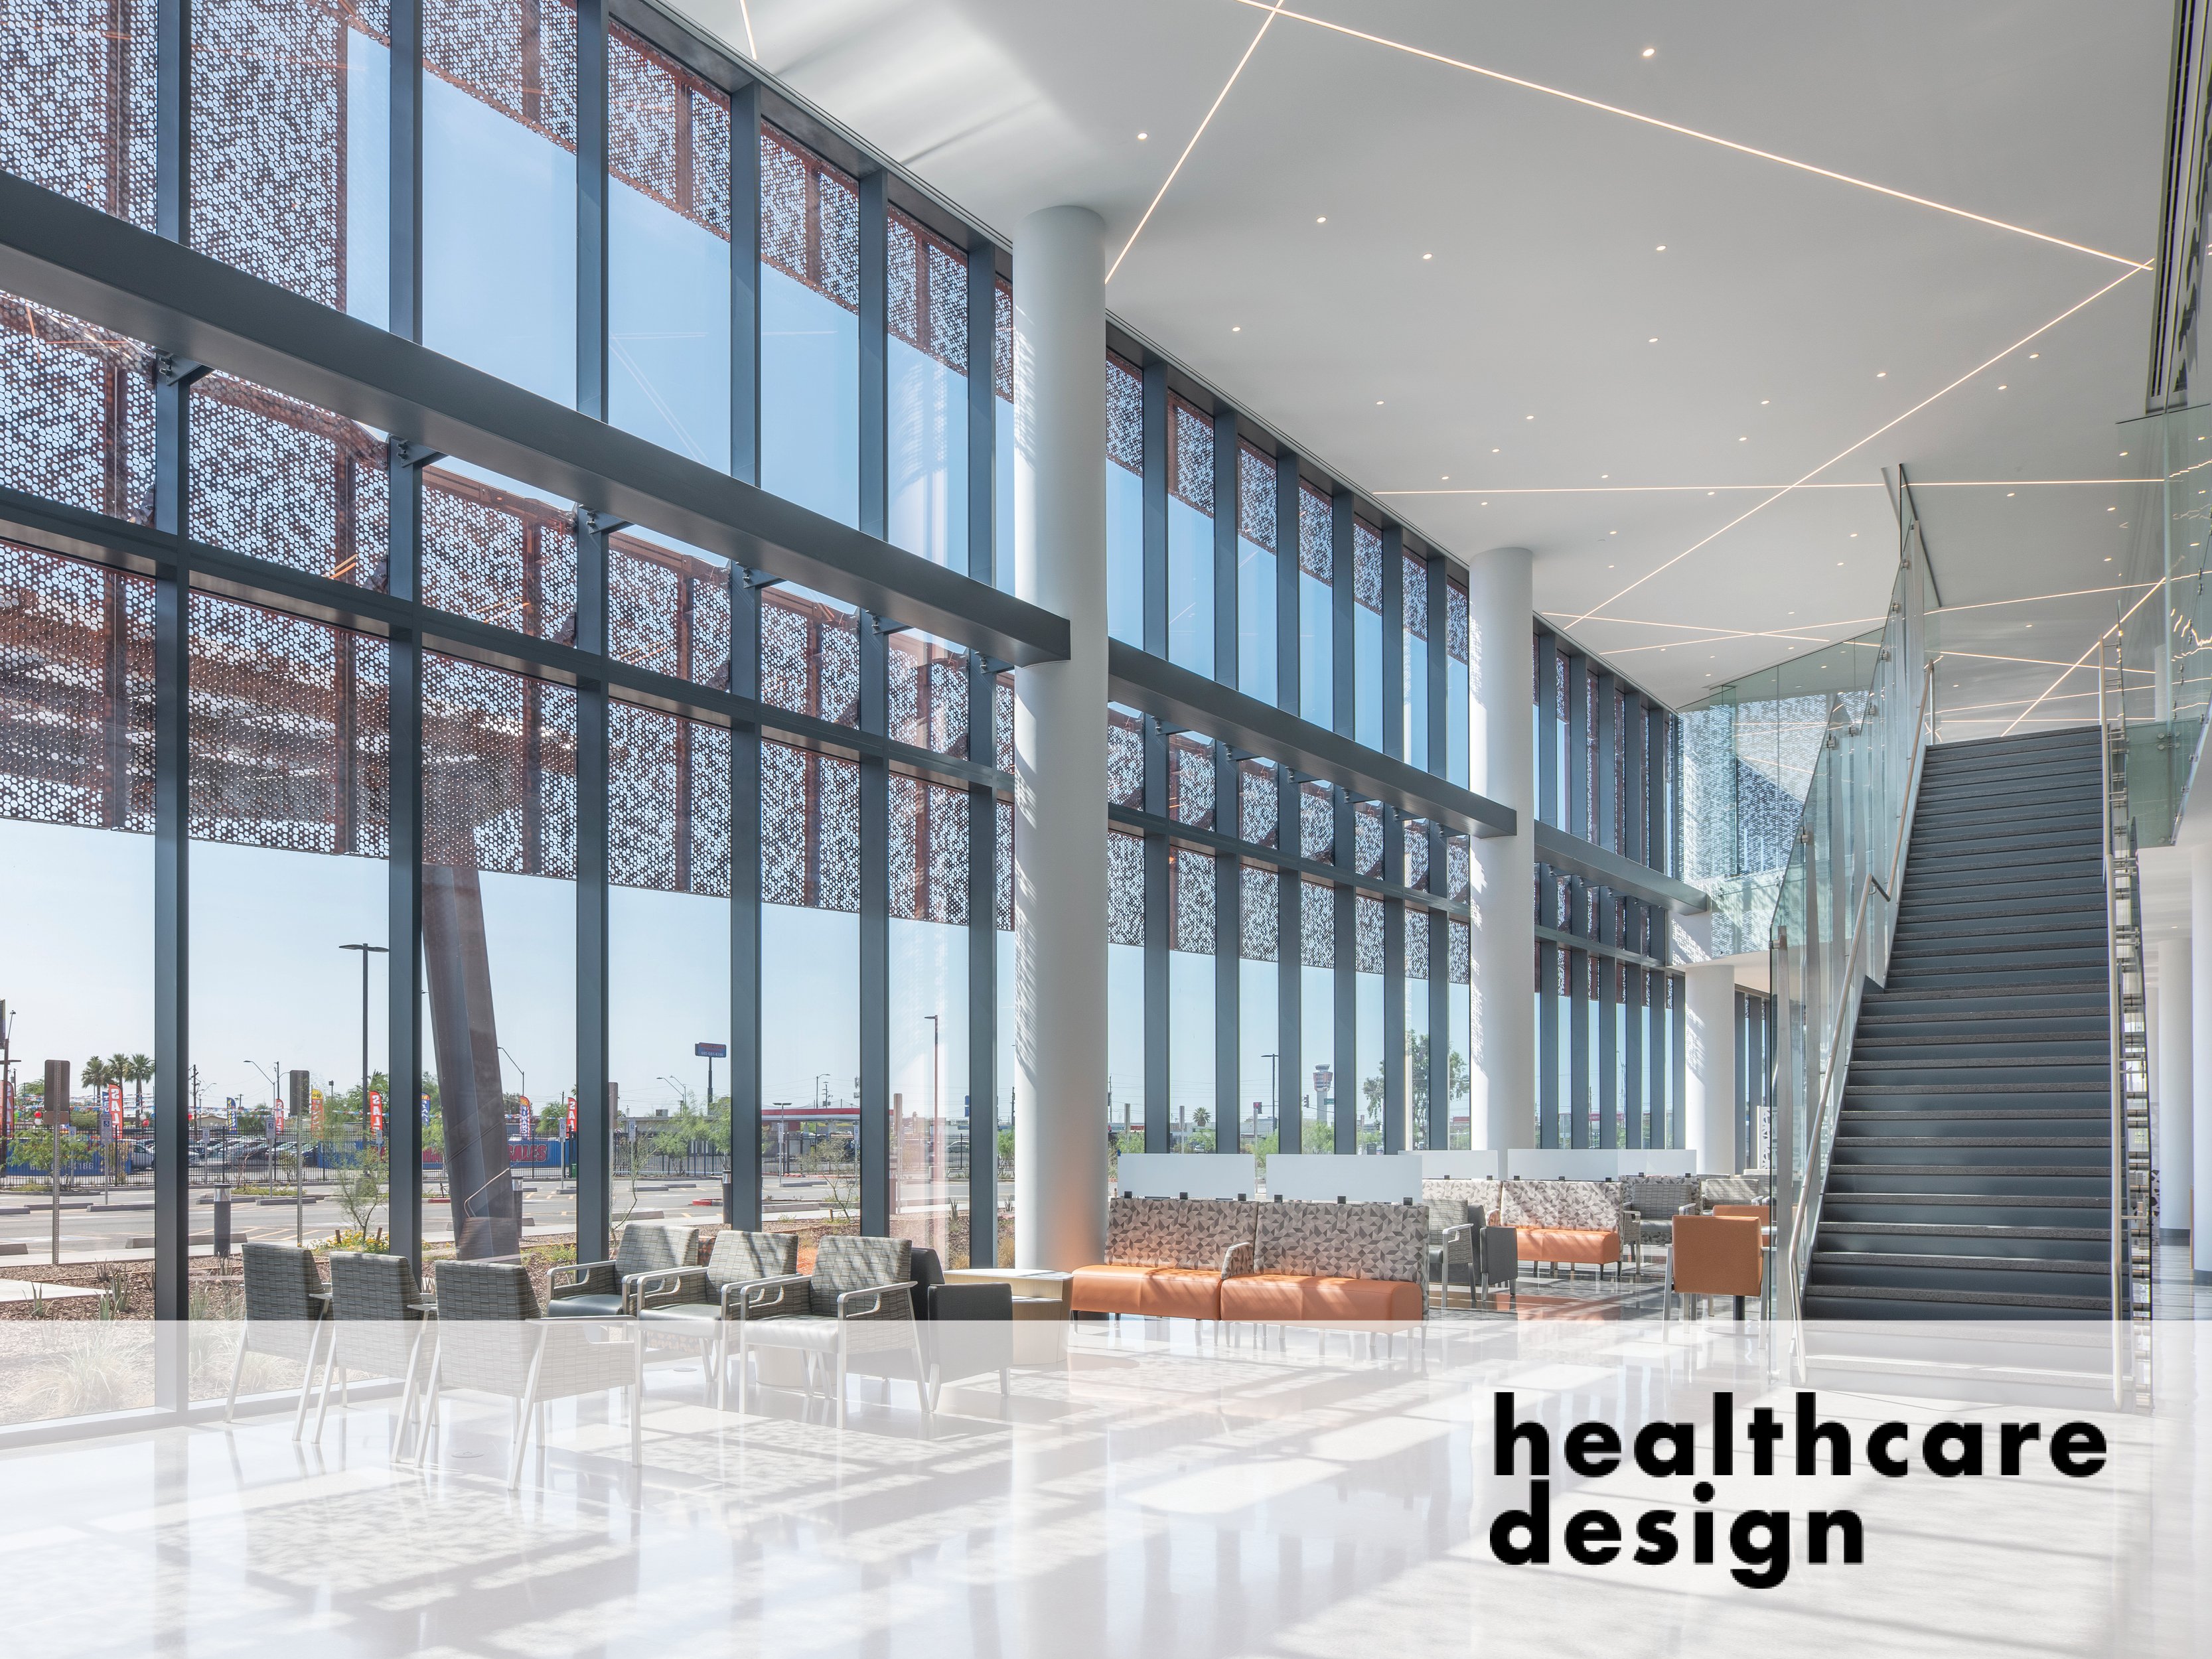 Using Sustainable Design To Create A Healing Environment For Veterans